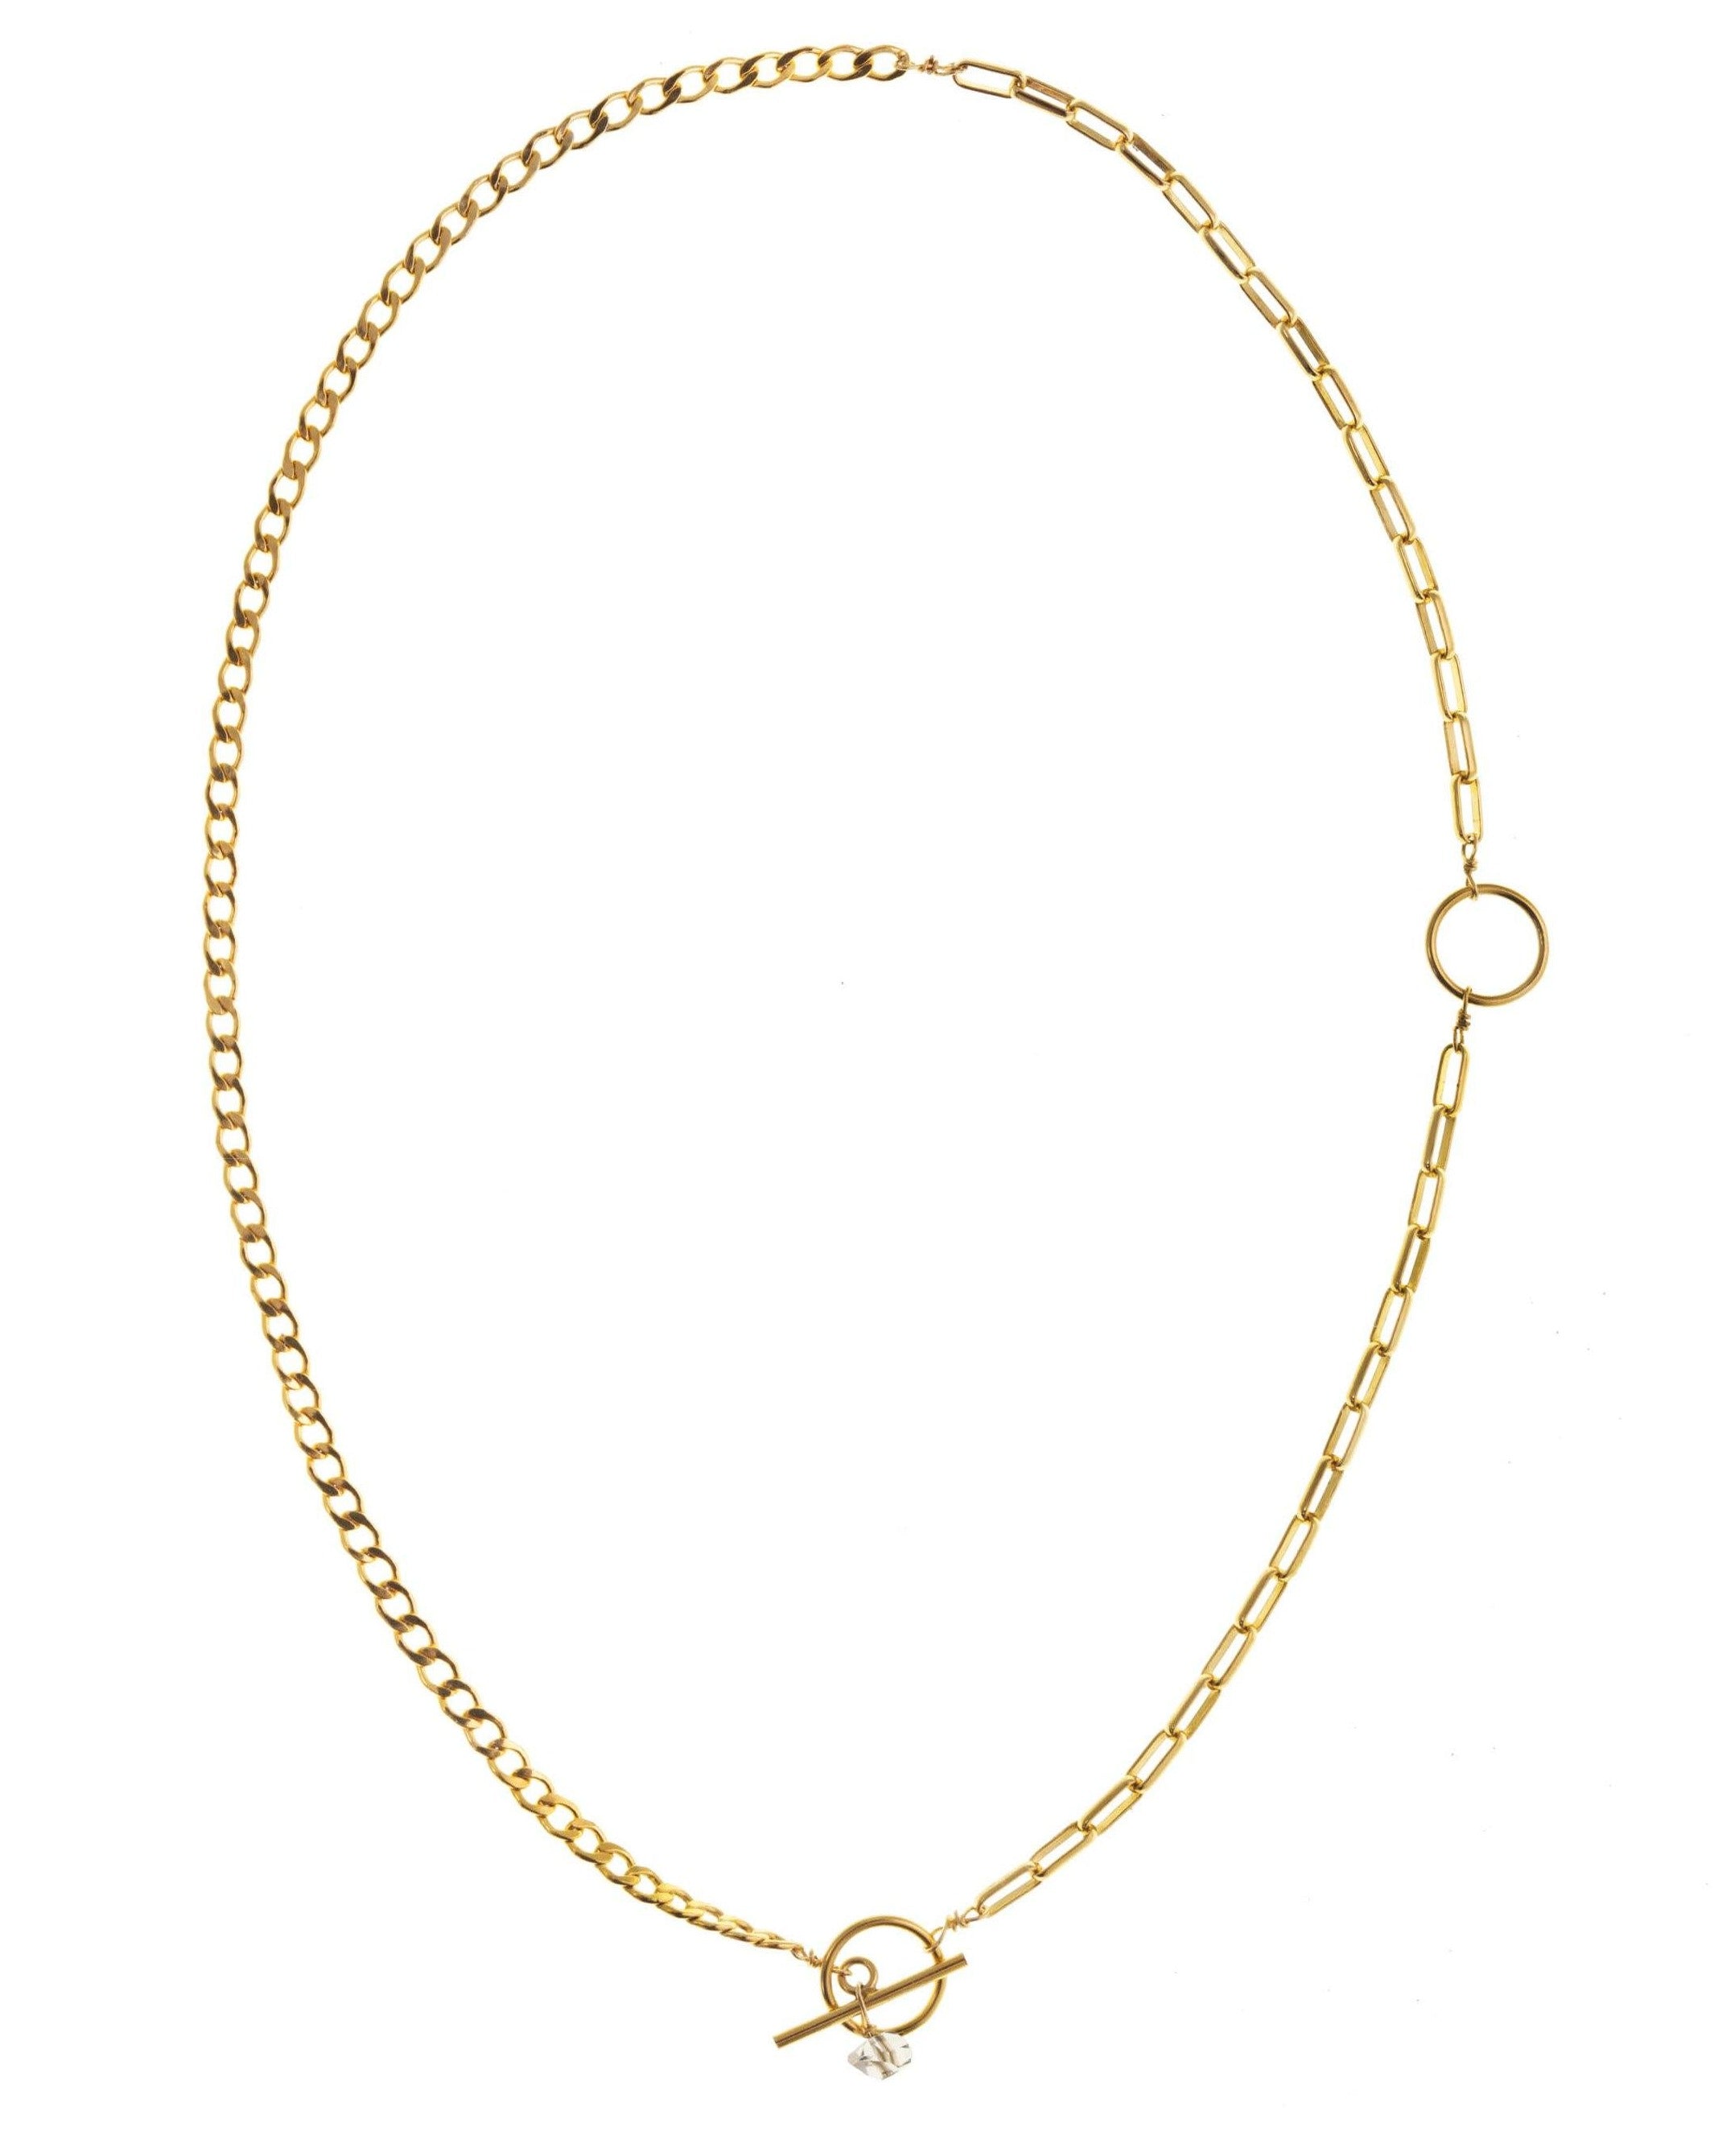 Titi Necklace by KOZAKH. A 16 inches long necklace, crafted in 14K Gold Filled, featuring a Herkimer Diamond.